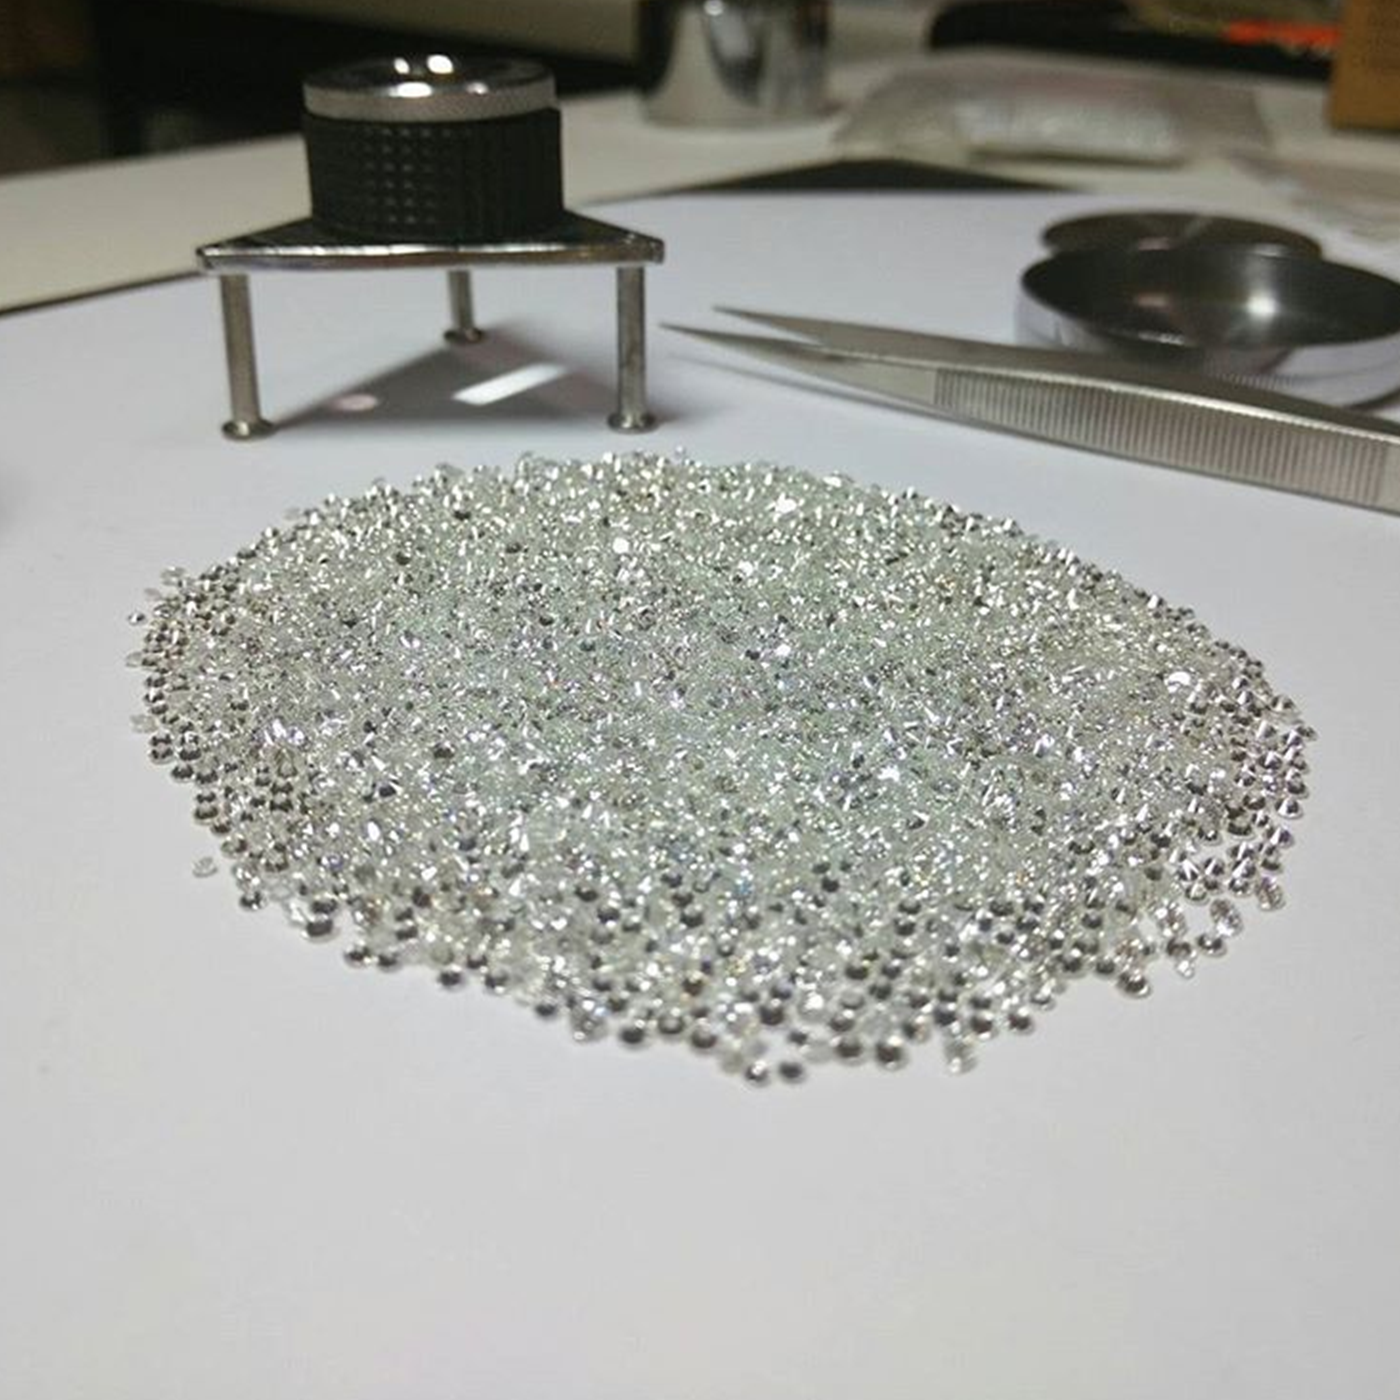 Cvd Diamond 1.50mm to 1.55mm GHI VS SI Round Brilliant Cut Lab Grown HPHT Loose Stones TCW 1